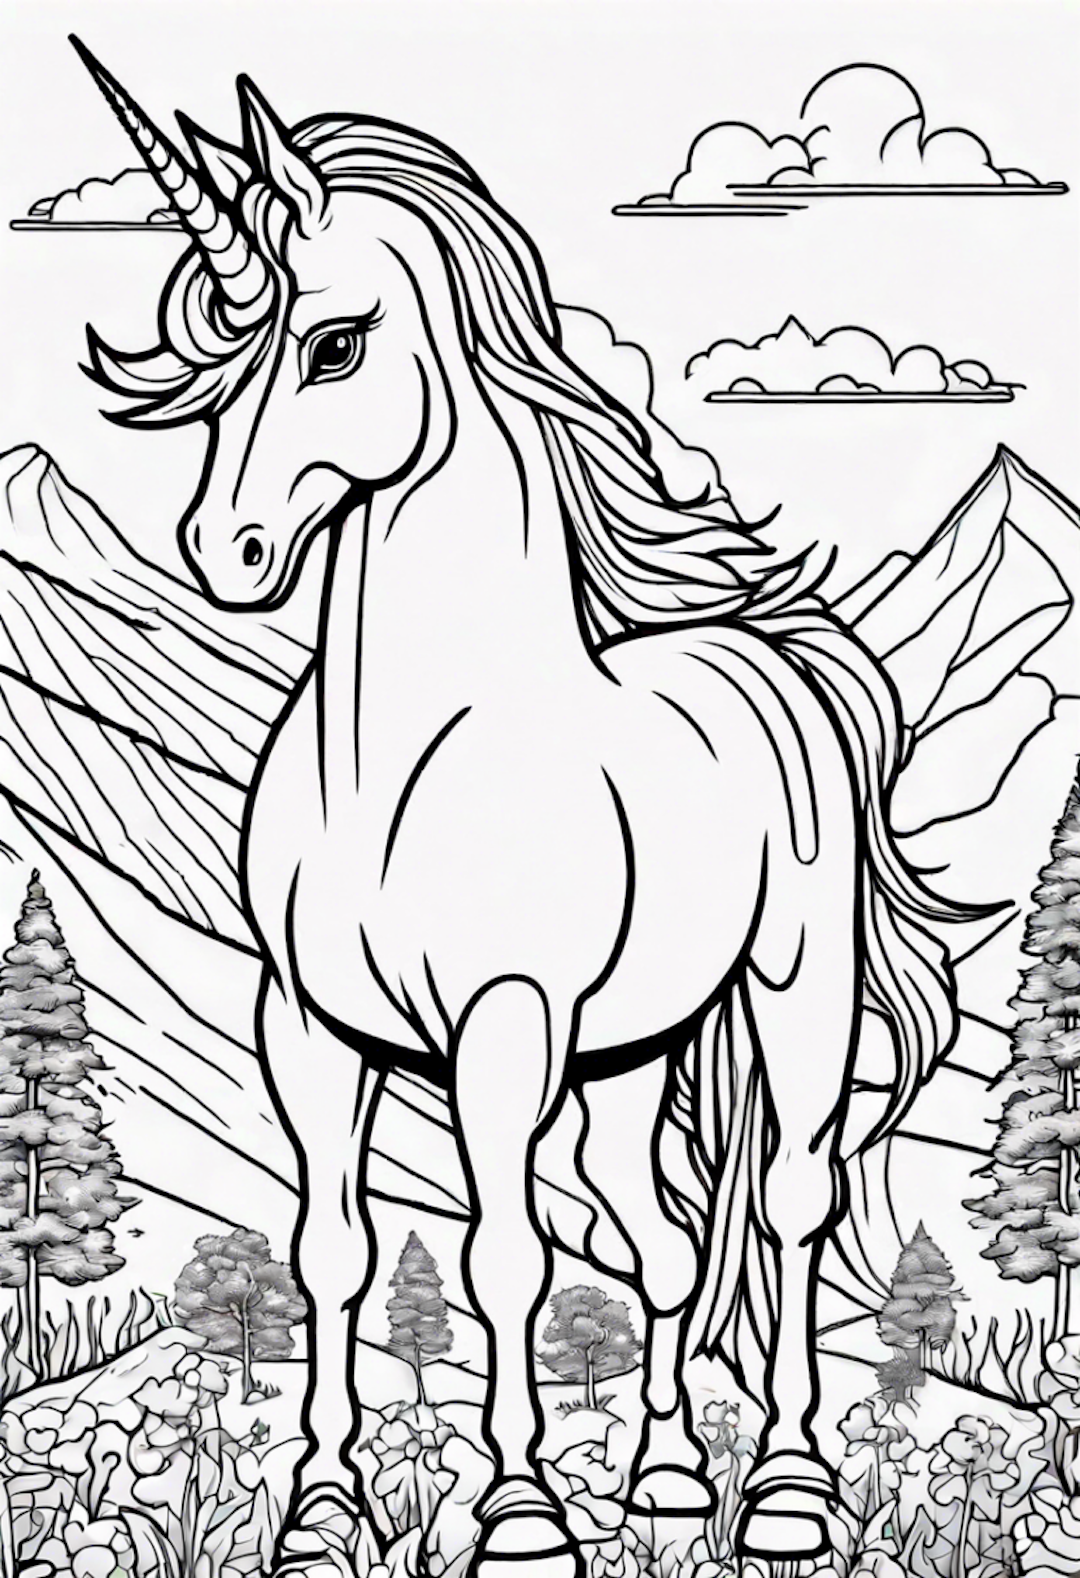 Happy Unicorn coloring pages